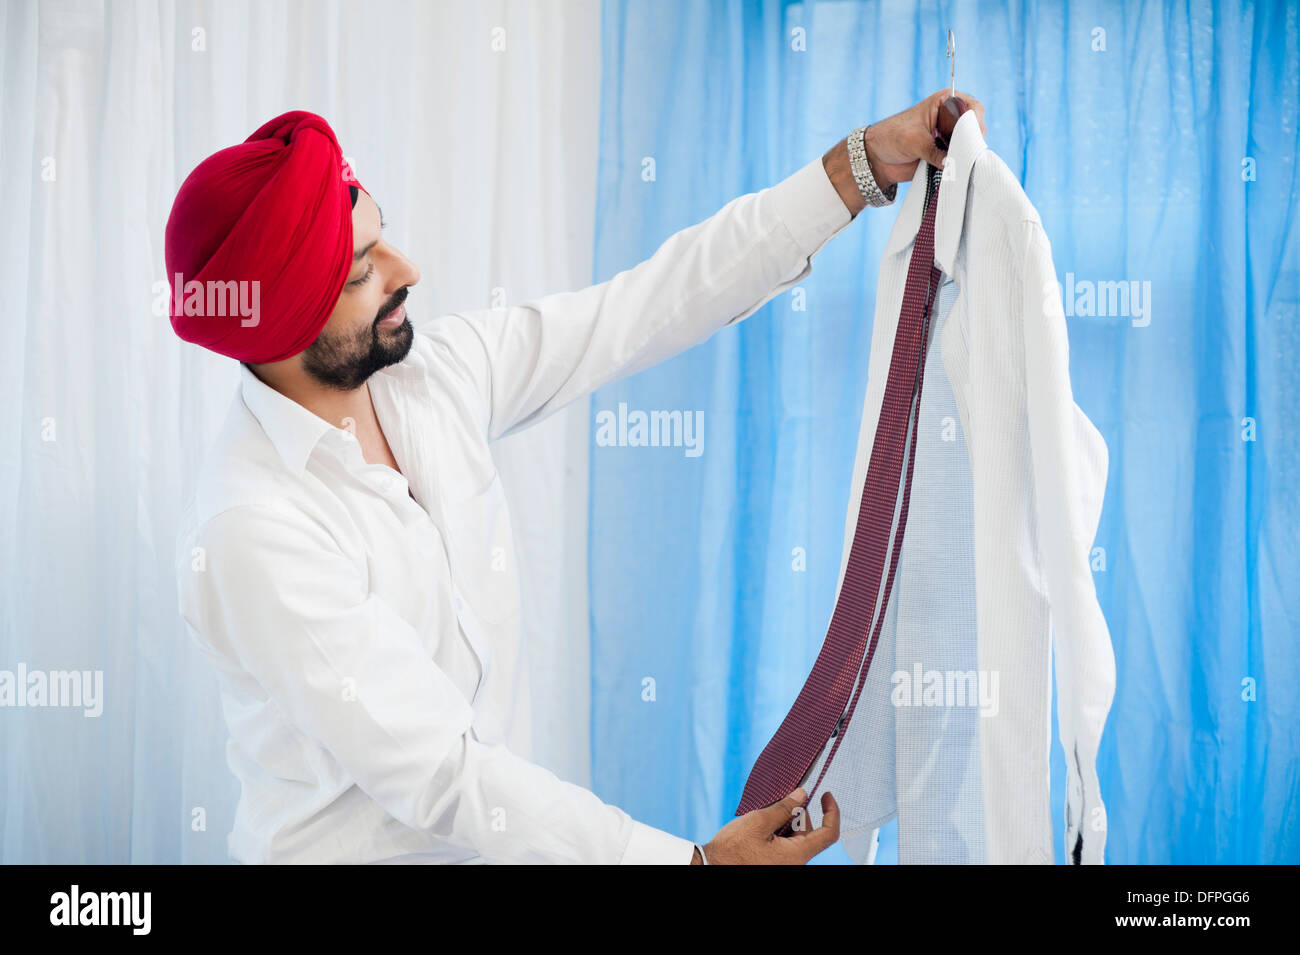 Sikh man matching a tie Stock Photo